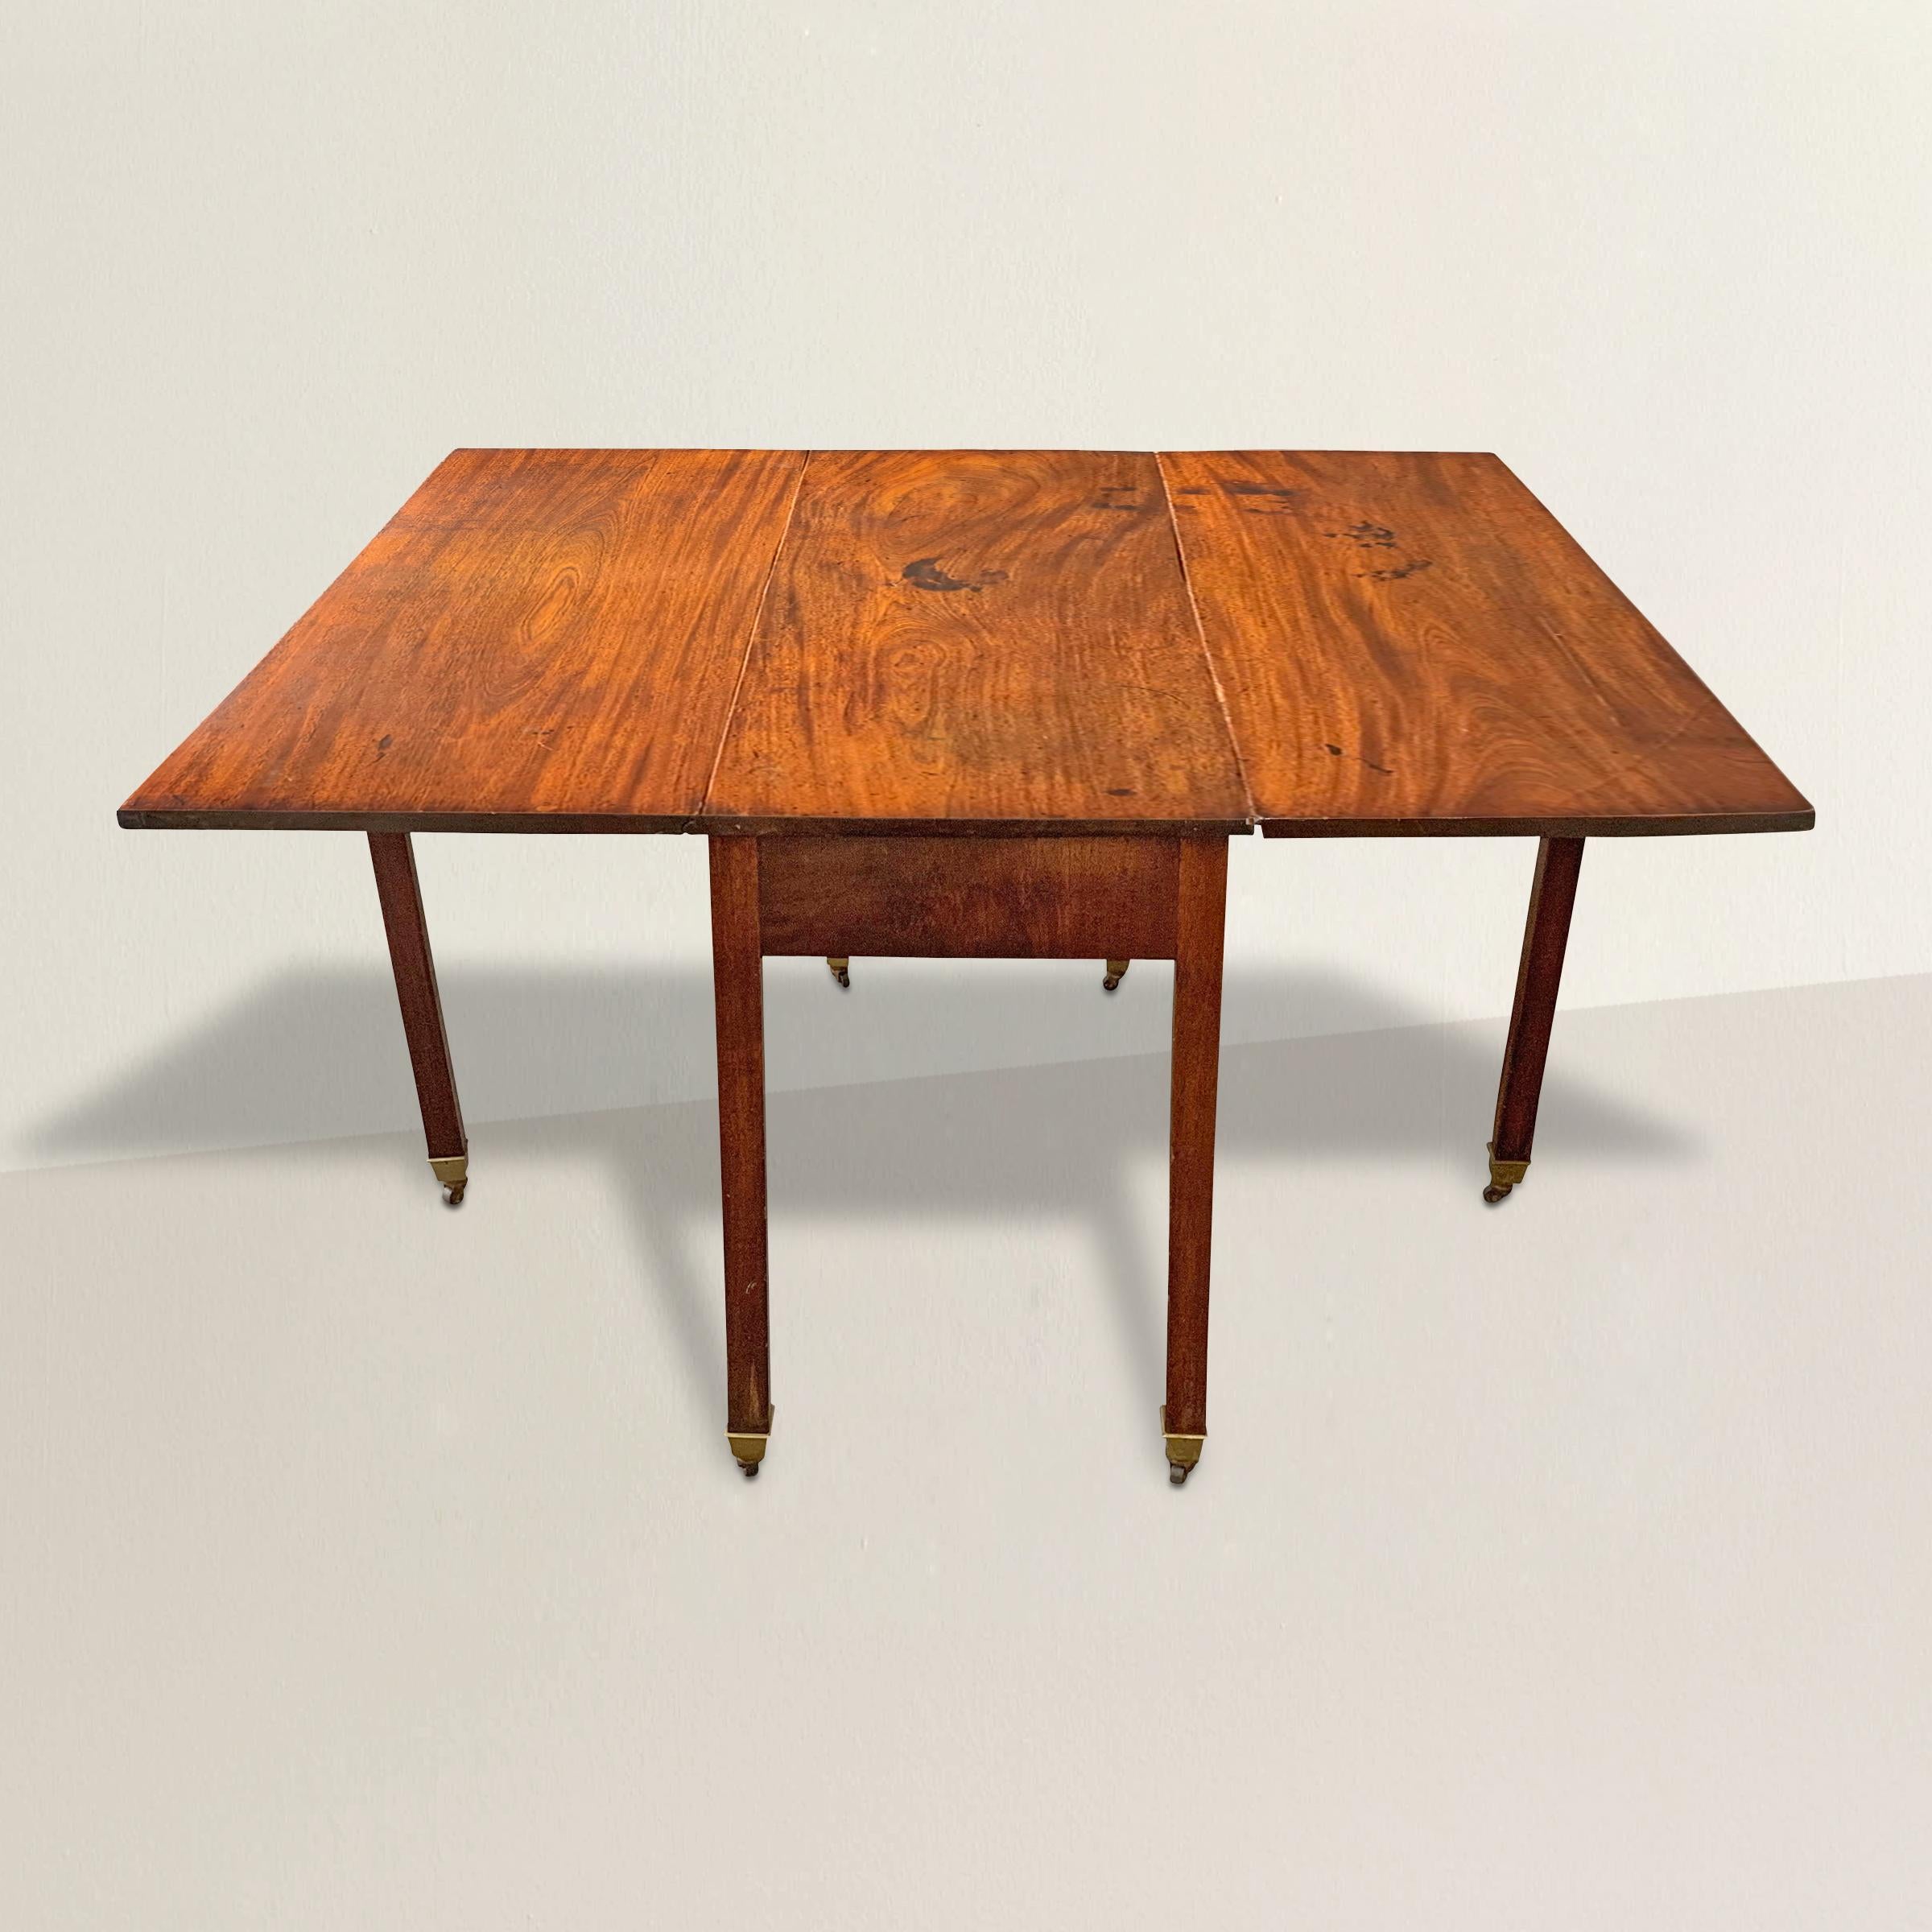 A chic and modern-in-spirit 18th century English Georgian mahogany drop-leaf gate-leg breakfast table with a top made from three solid planks of mahogany and tapered square legs ending with brass-mounted iron casters. This table is very versatile